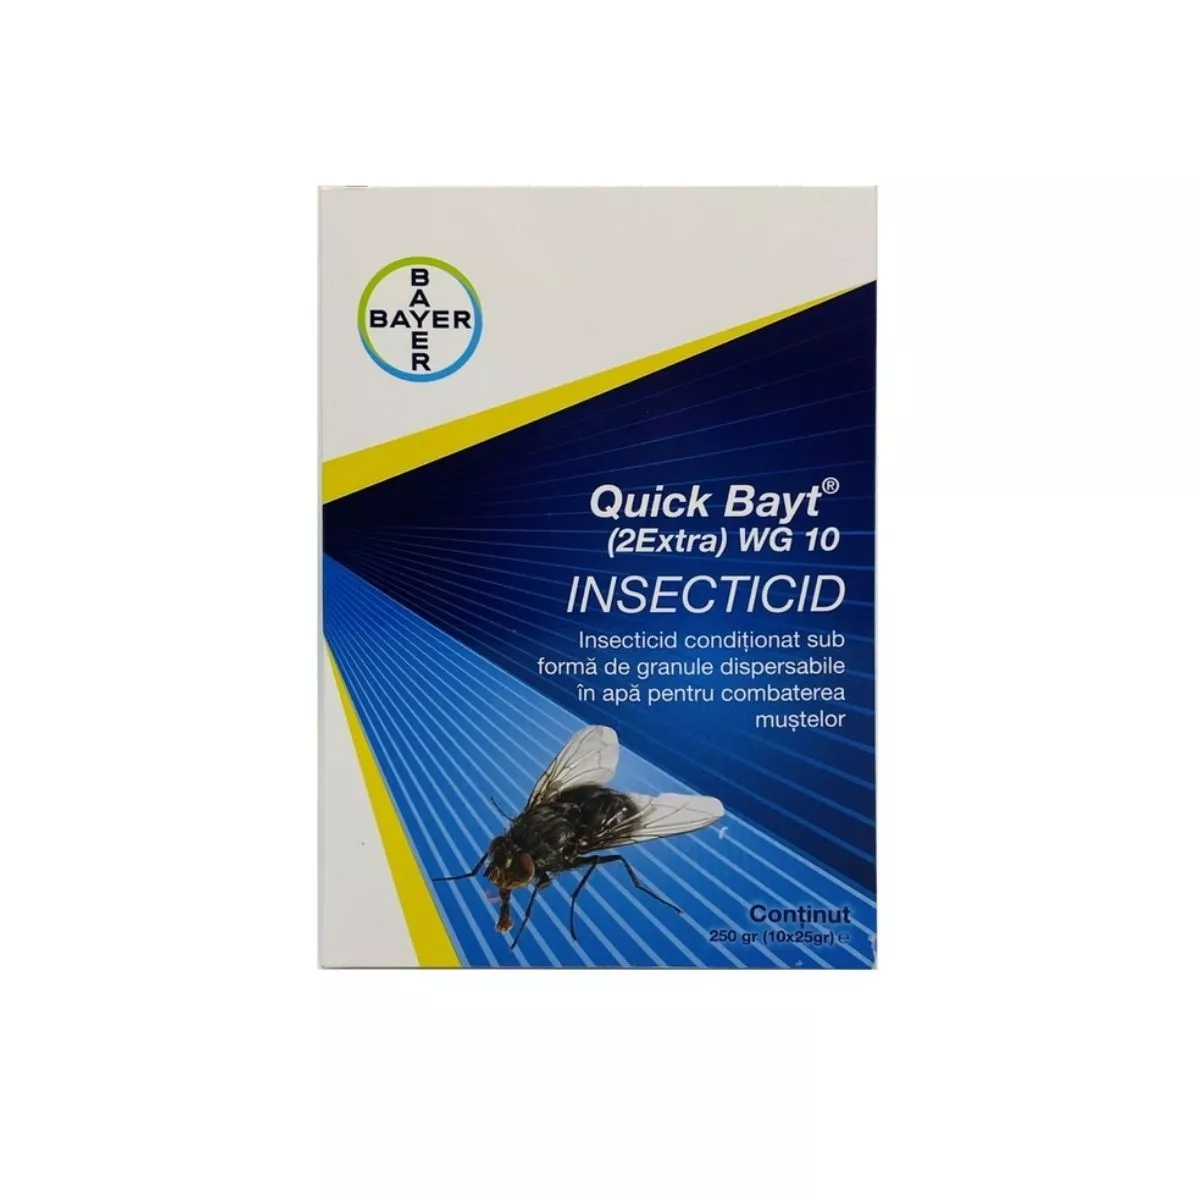 Insecticid QUICK BAYT EXTRA 10 WG 25g 1